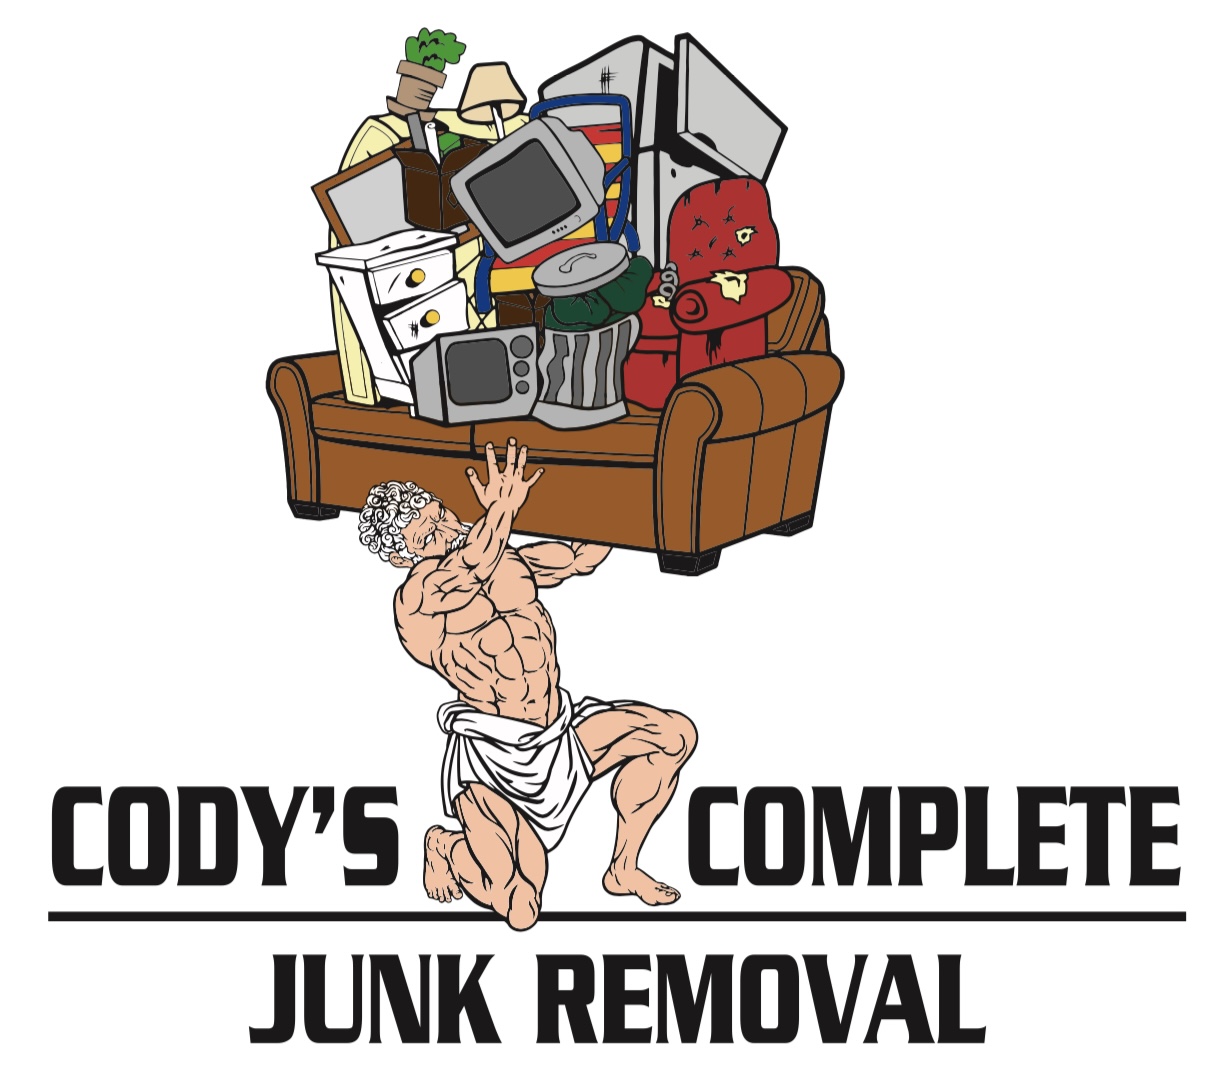 Cody's Complete Junk Removal